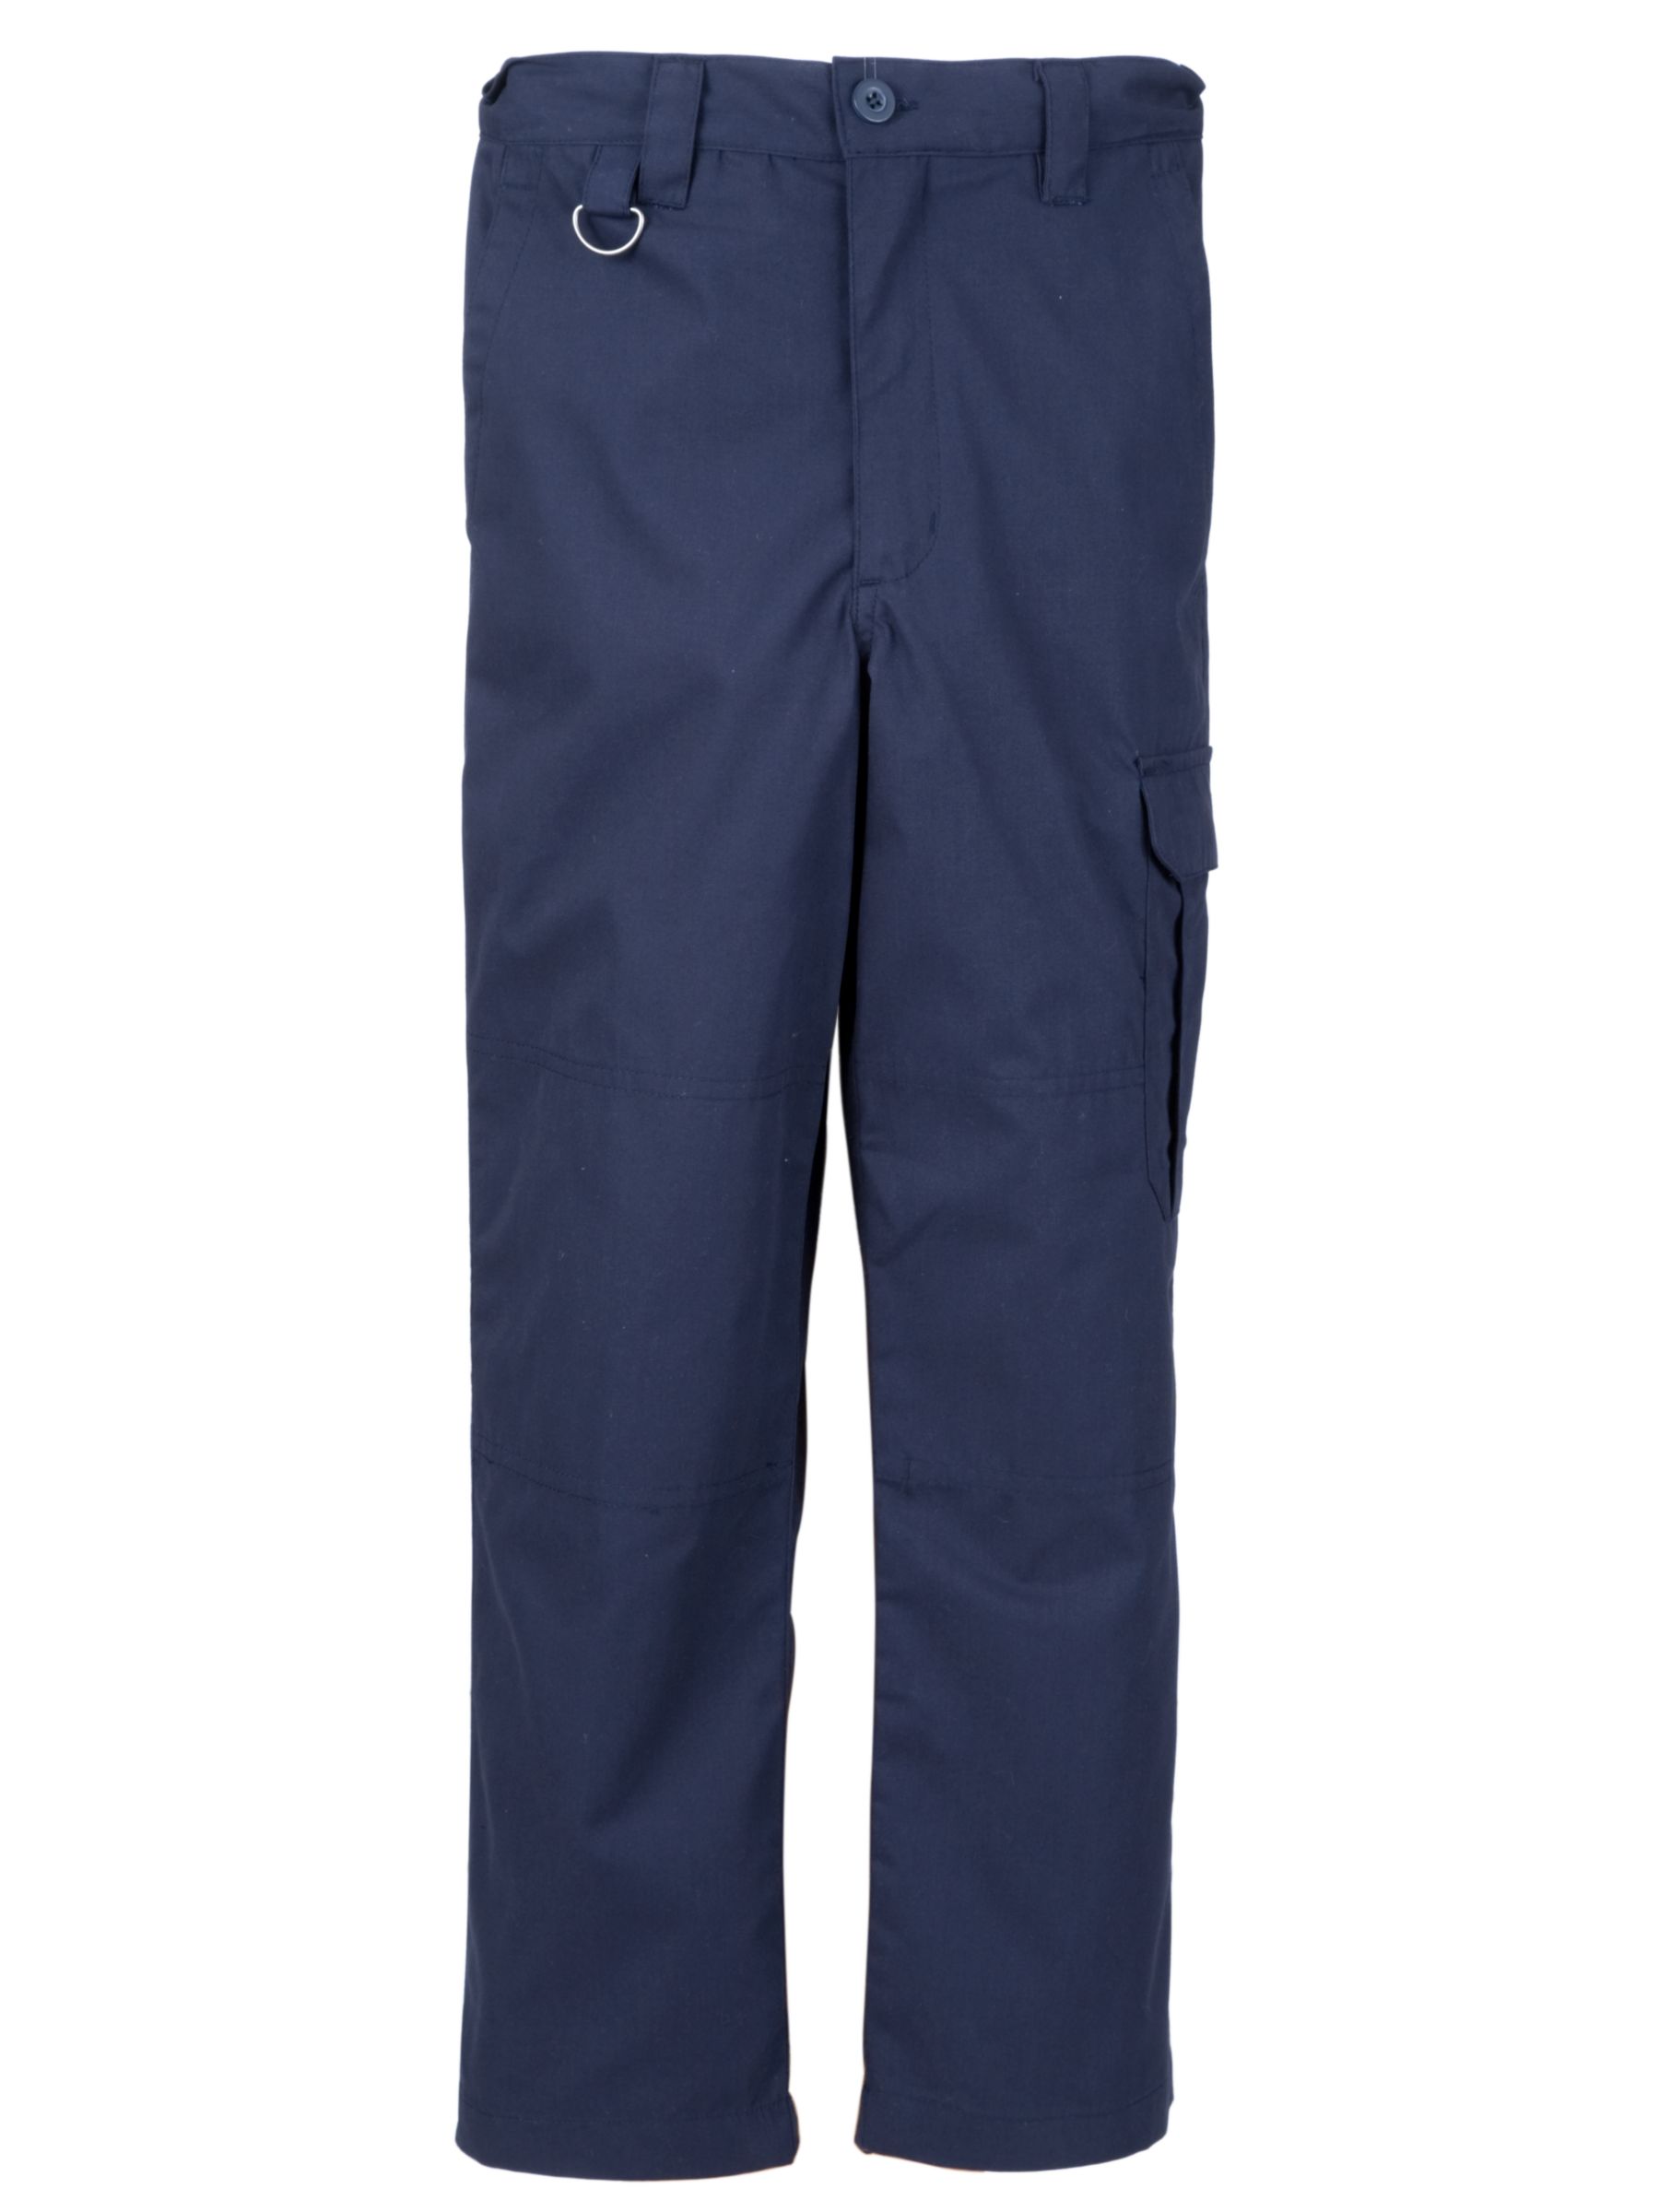 Other Schools Activity Trousers, Navy 40003